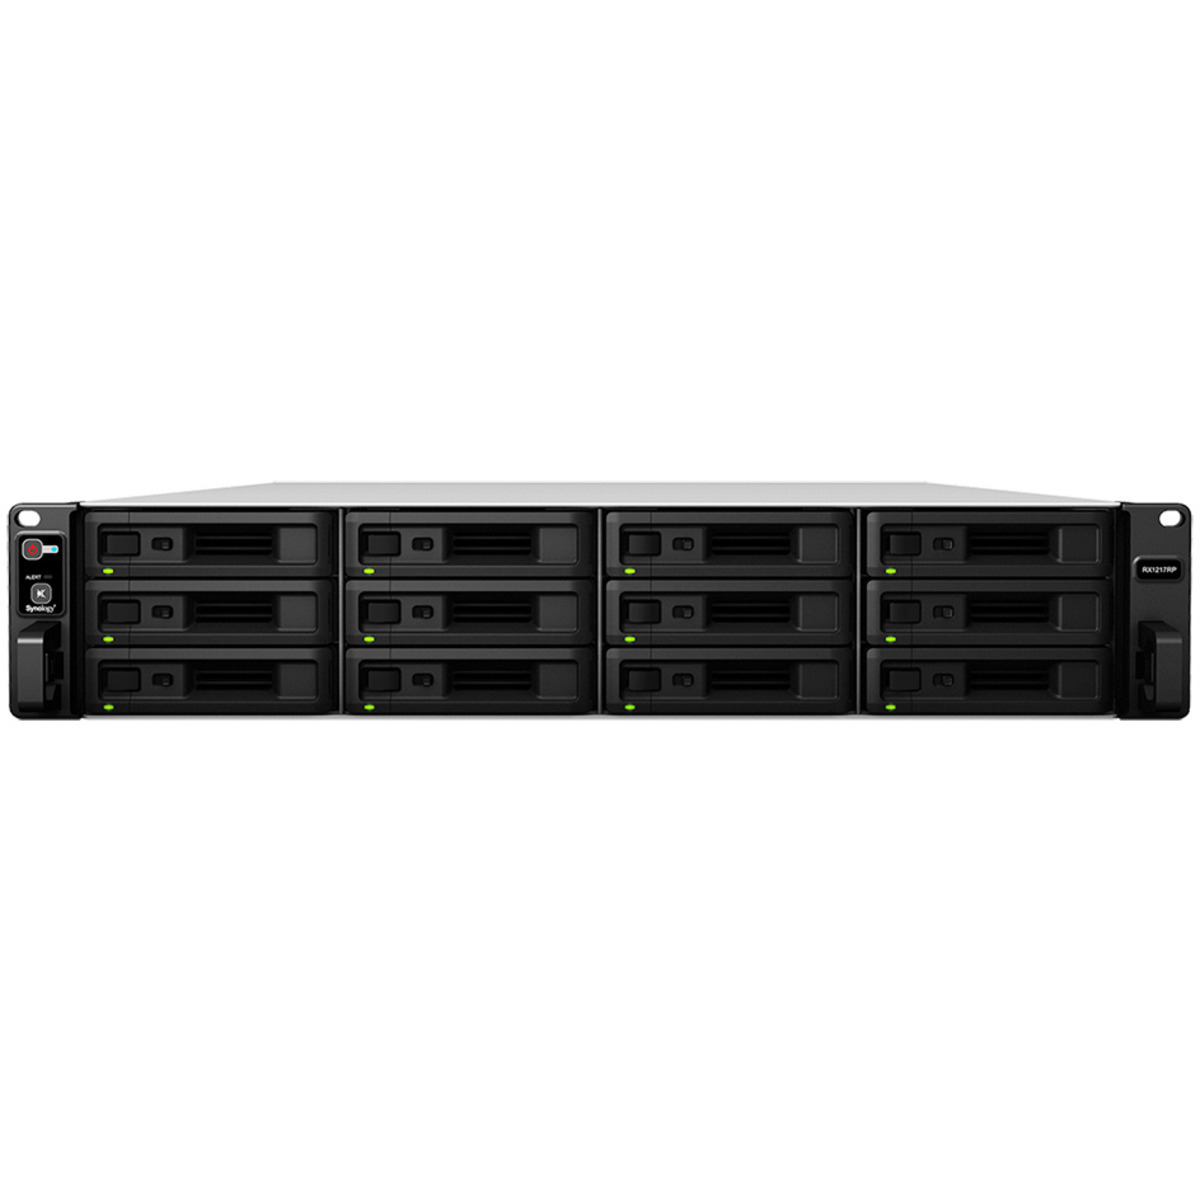 Synology RX1217RP External Expansion Drive 132tb 12-Bay RackMount Large Business / Enterprise Expansion Enclosure 11x12tb Synology HAT5300 Series HAT5300-12T 3.5 7200rpm SATA 6Gb/s HDD ENTERPRISE Class Drives Installed - Burn-In Tested RX1217RP External Expansion Drive